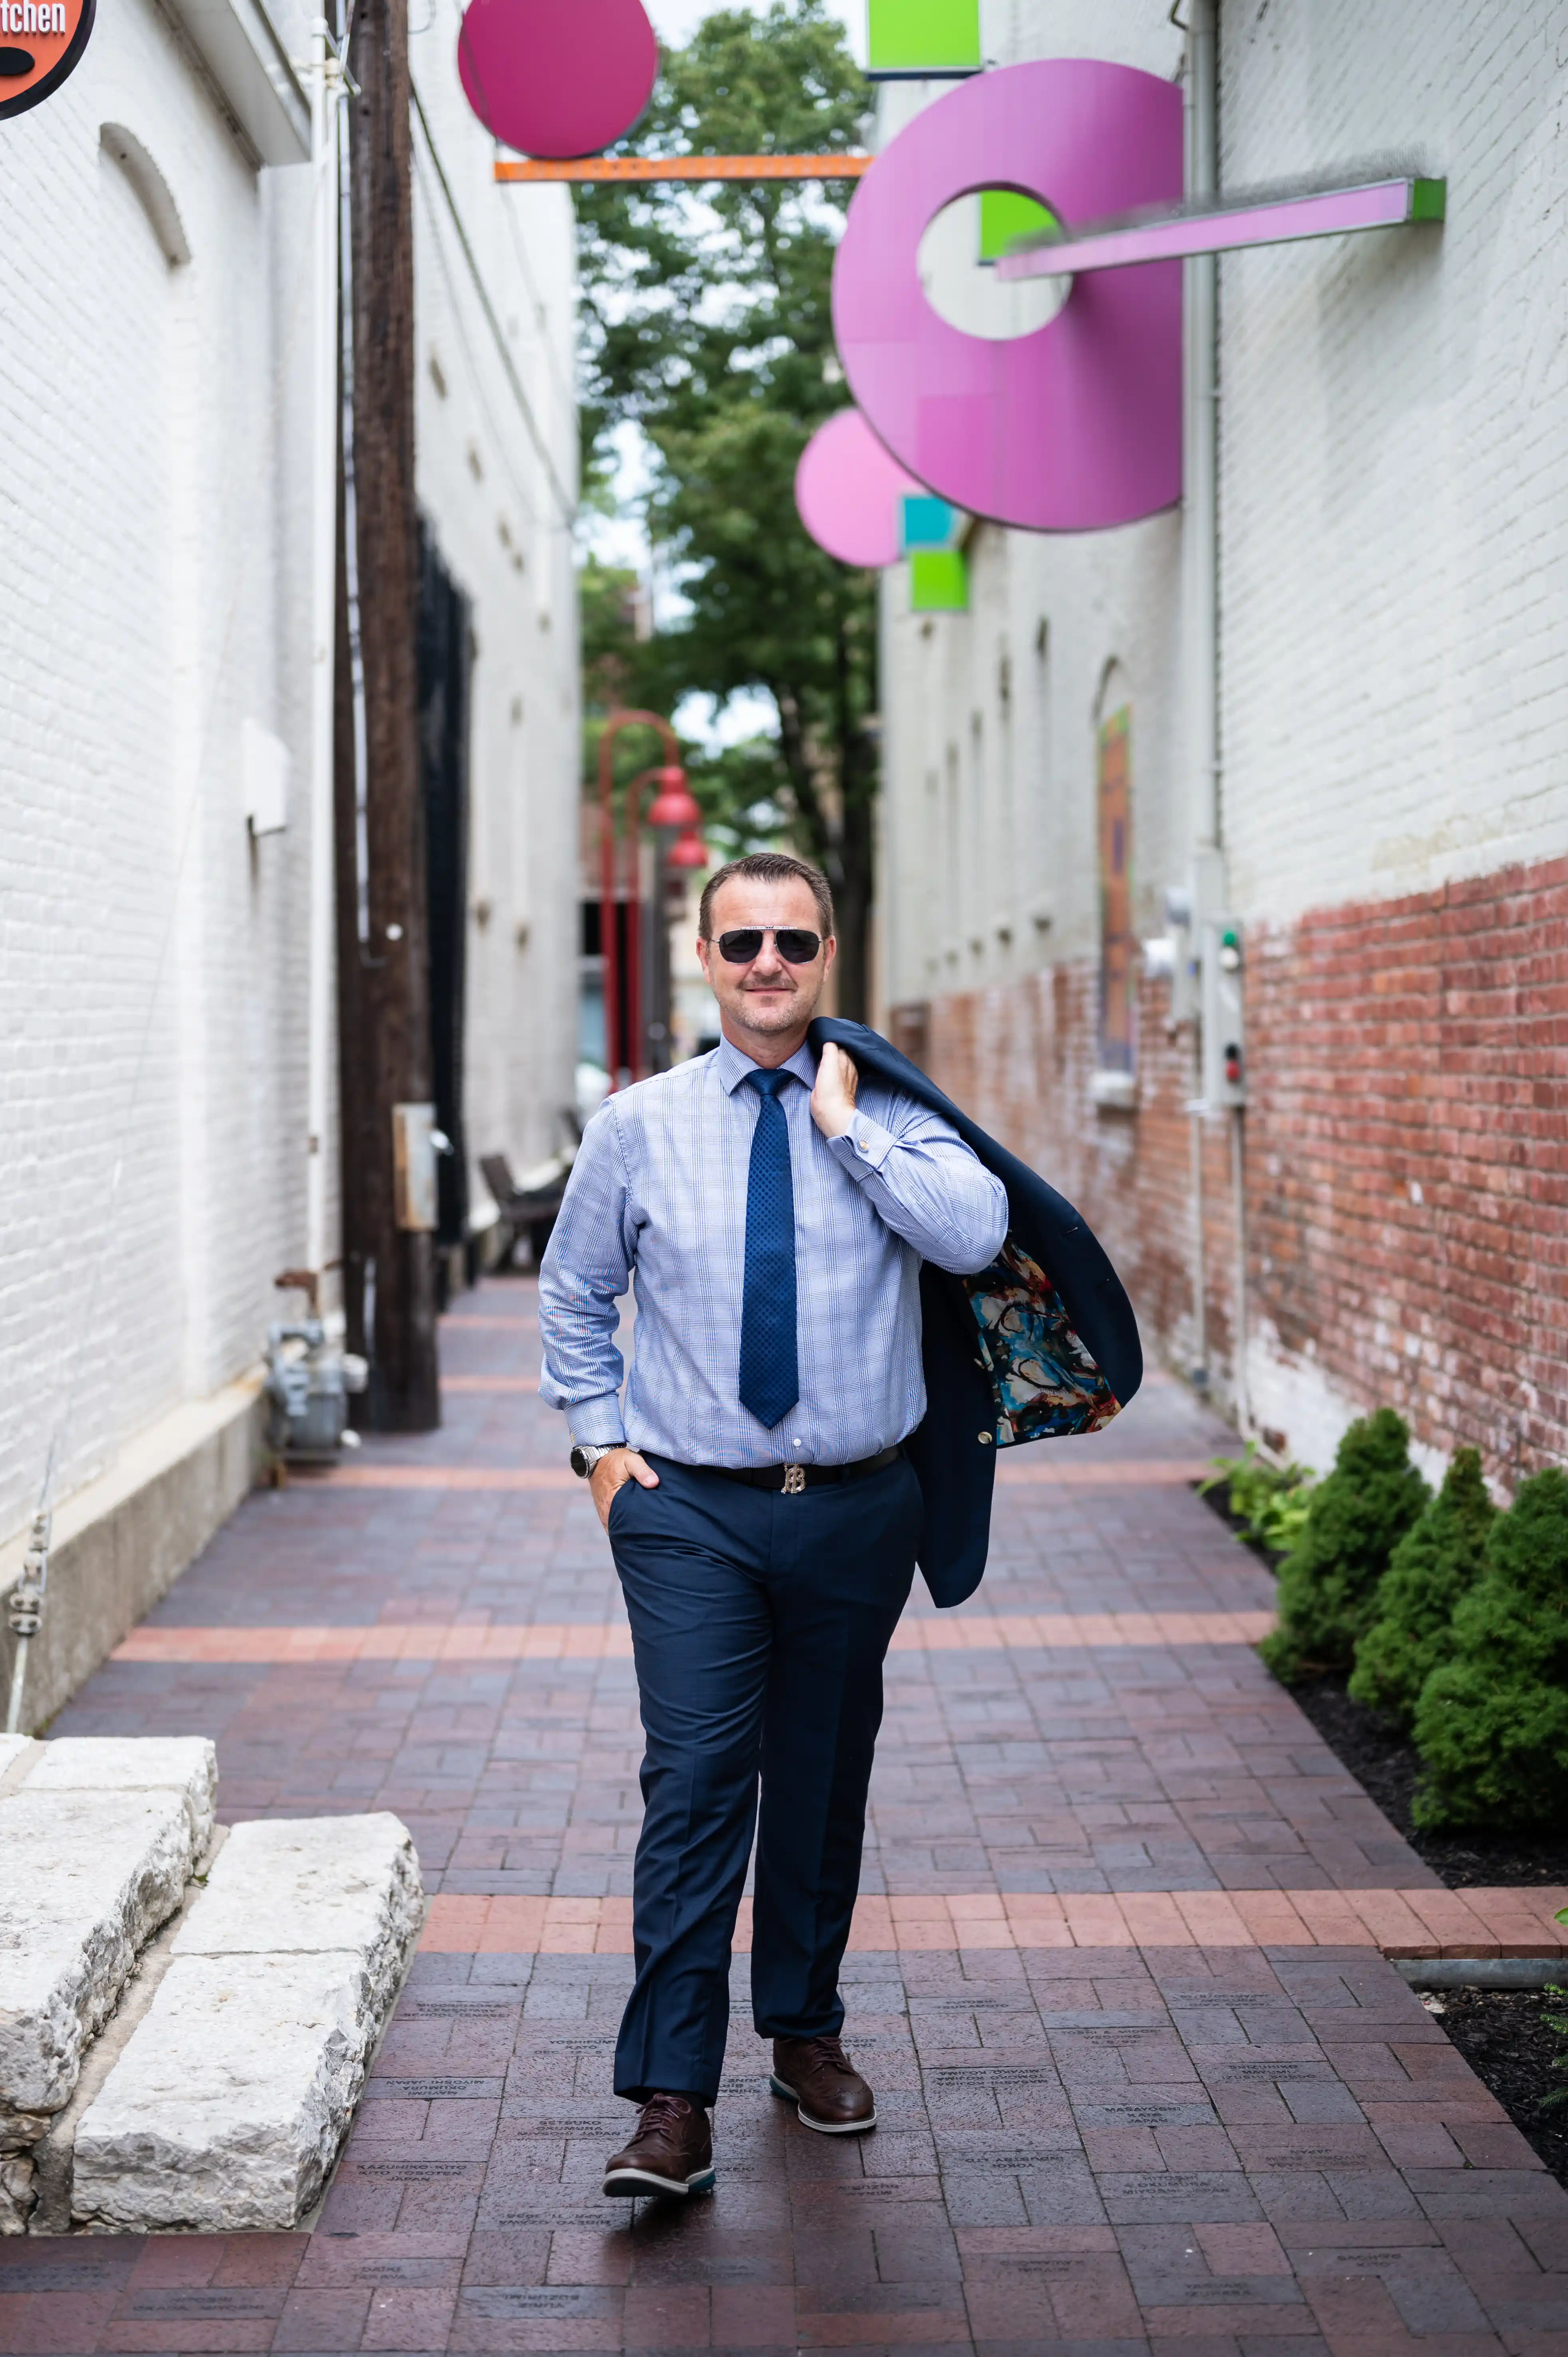 Man in a shirt and tie walking with sunglasses and a backpack in an alleyway decorated with colorful balloons.